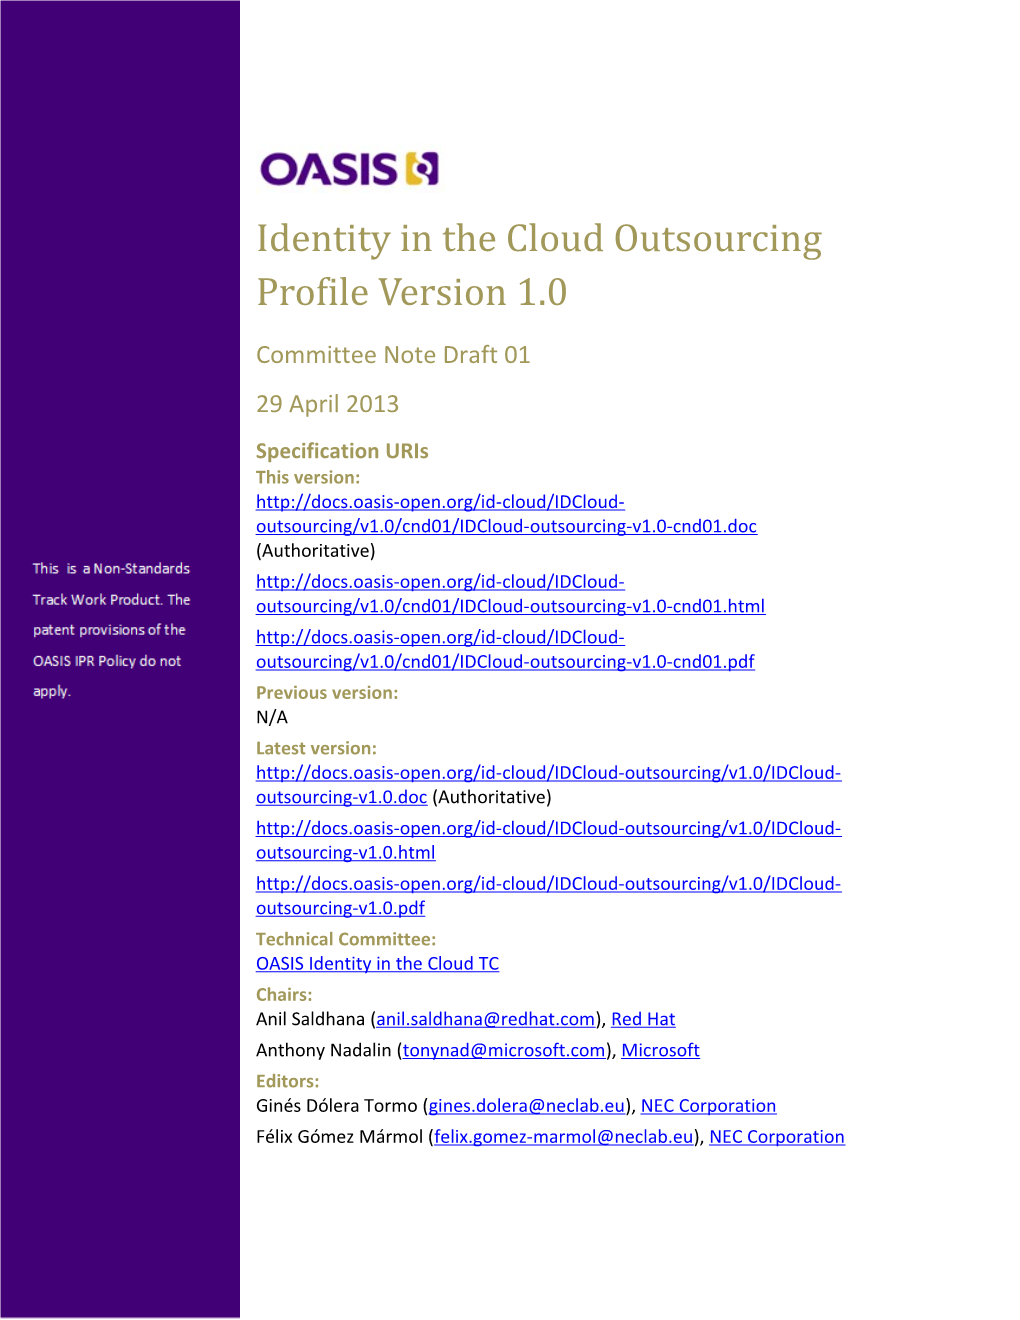 Identity in the Cloud Outsourcing Profile Version 1.0